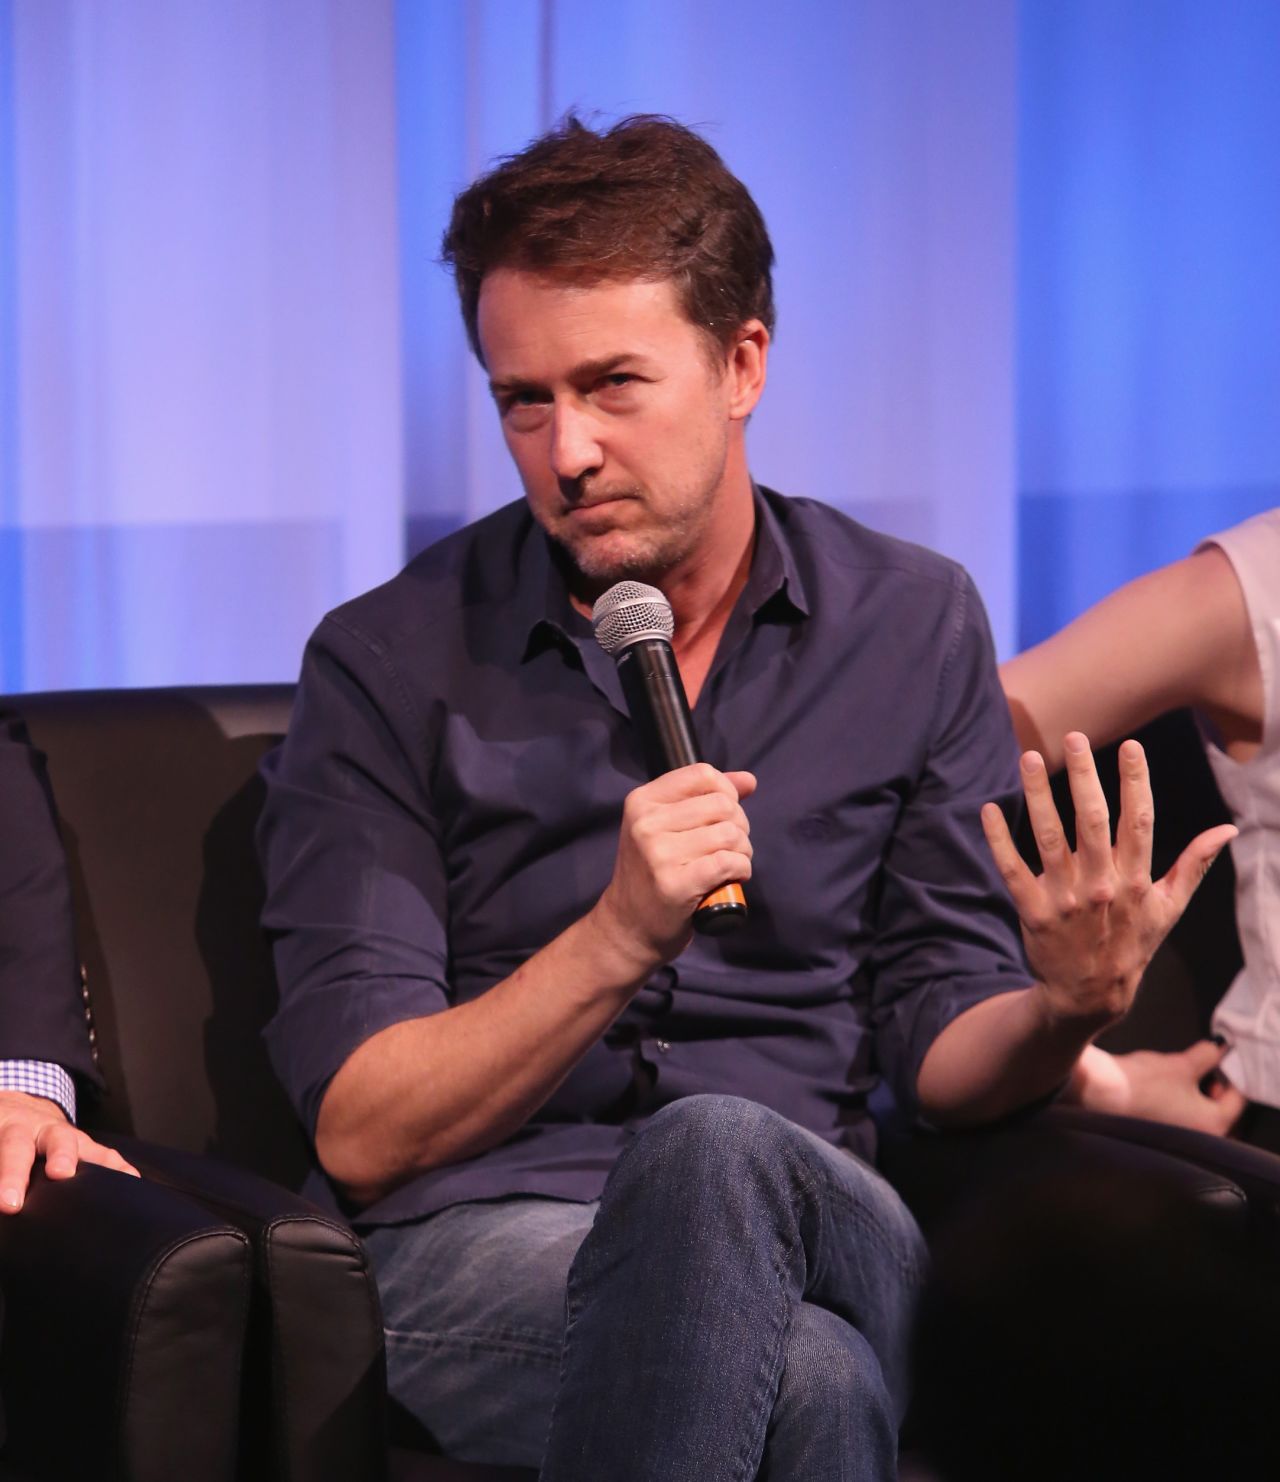 The Boston-born, Maryland-raised Edward Norton spent some time in Japan after graduating from Yale. He worked for a foundation created by his grandfather, real-estate developer James Rouse. He says his Japanese is rusty but<a href="https://www.youtube.com/watch?v=5A3dsYKoJh0" target="_blank" target="_blank"> he can still speak it</a>. 